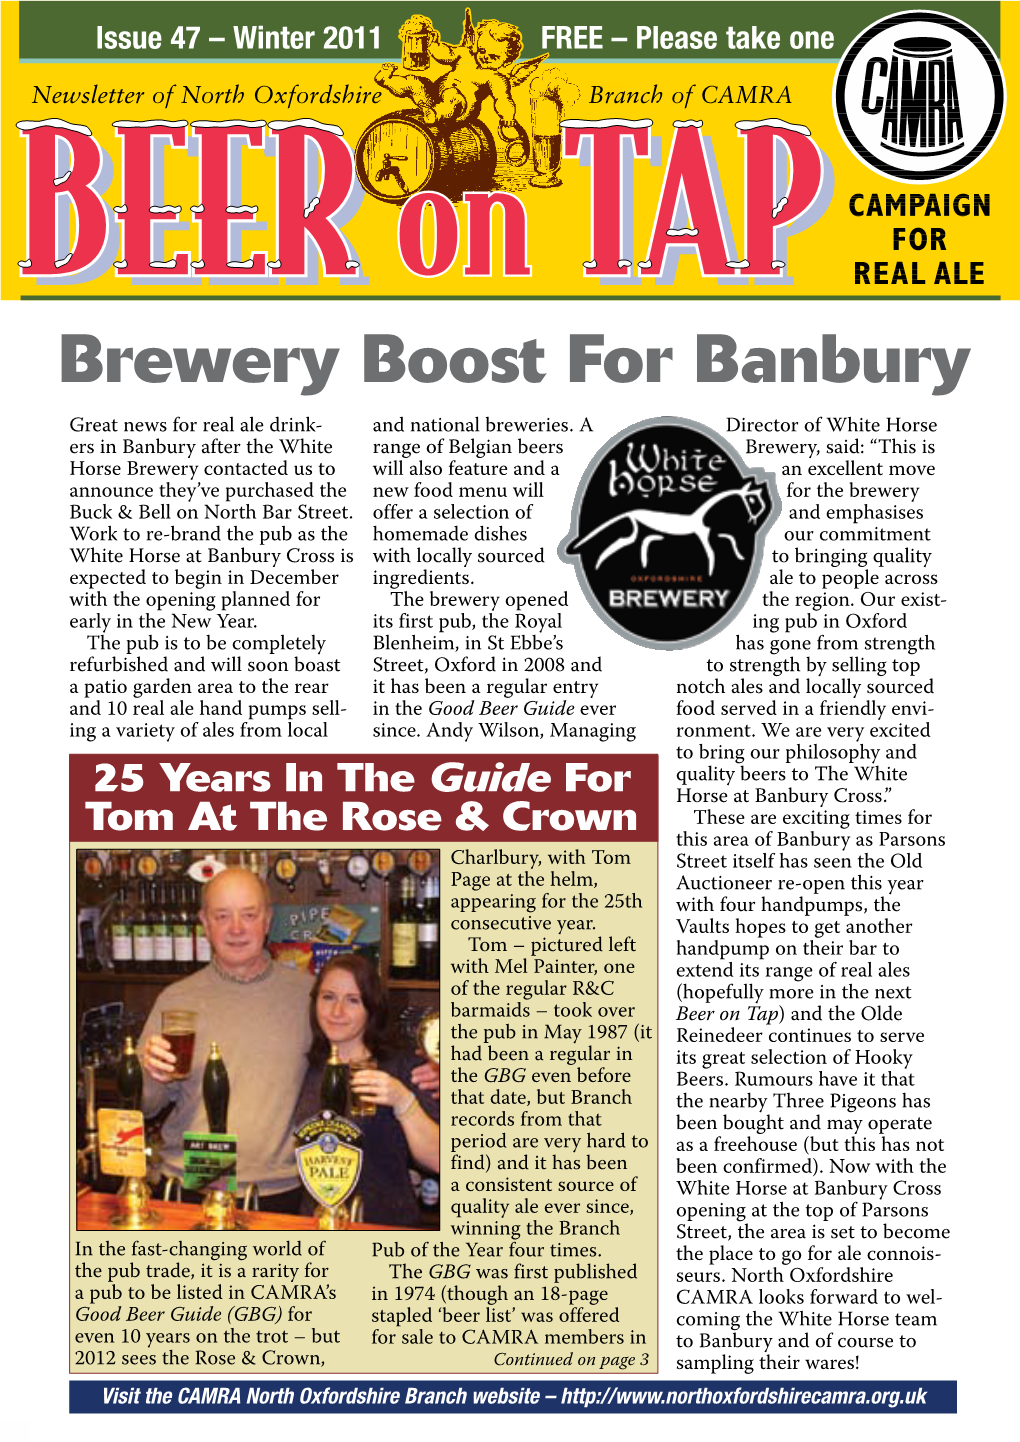 Brewery Boost for Banbury